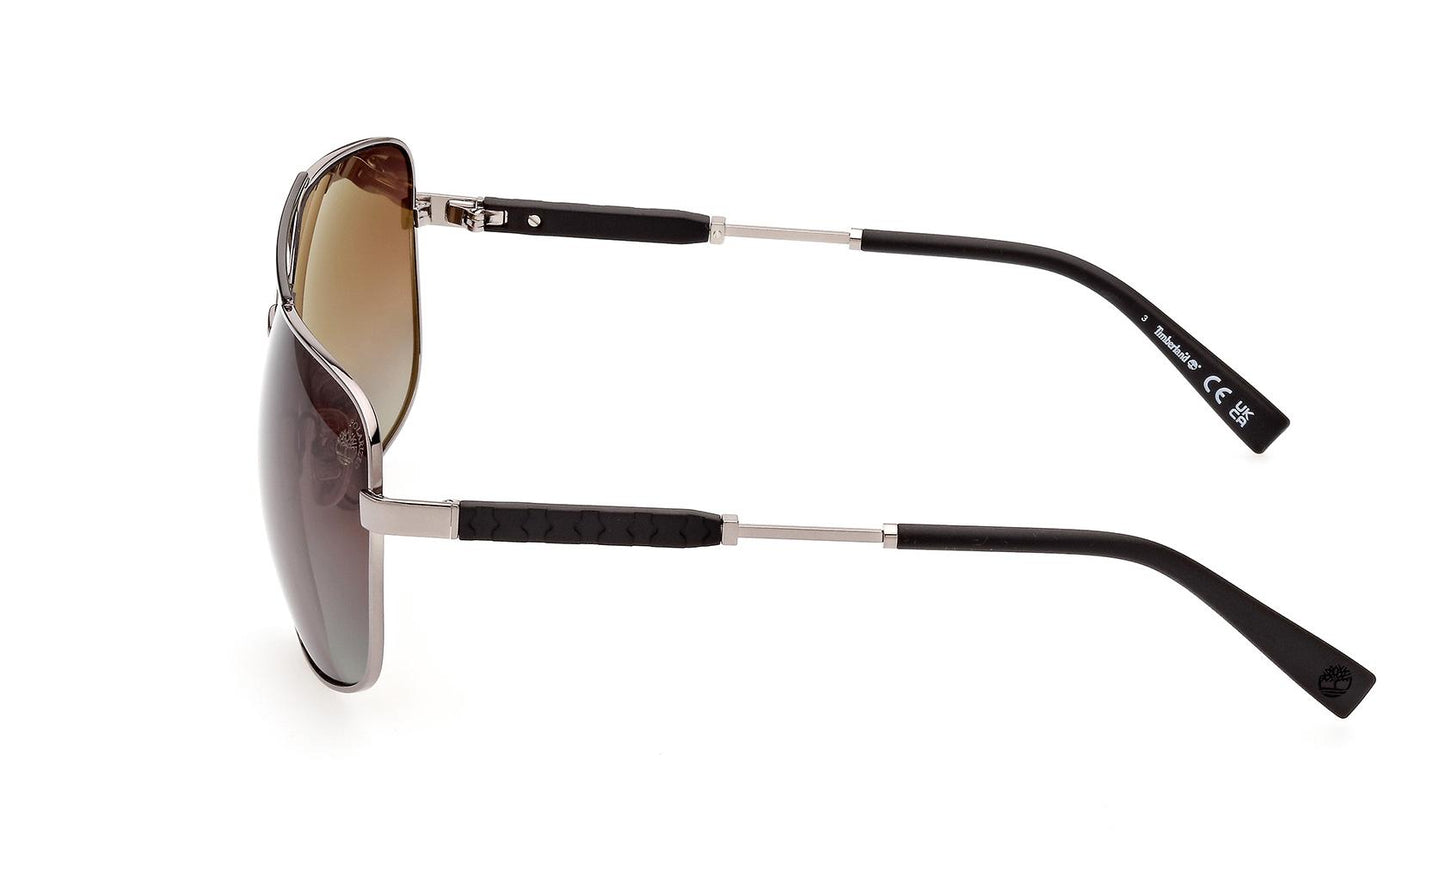 Load image into Gallery viewer, Timberland Sunglasses TB9283 08H
